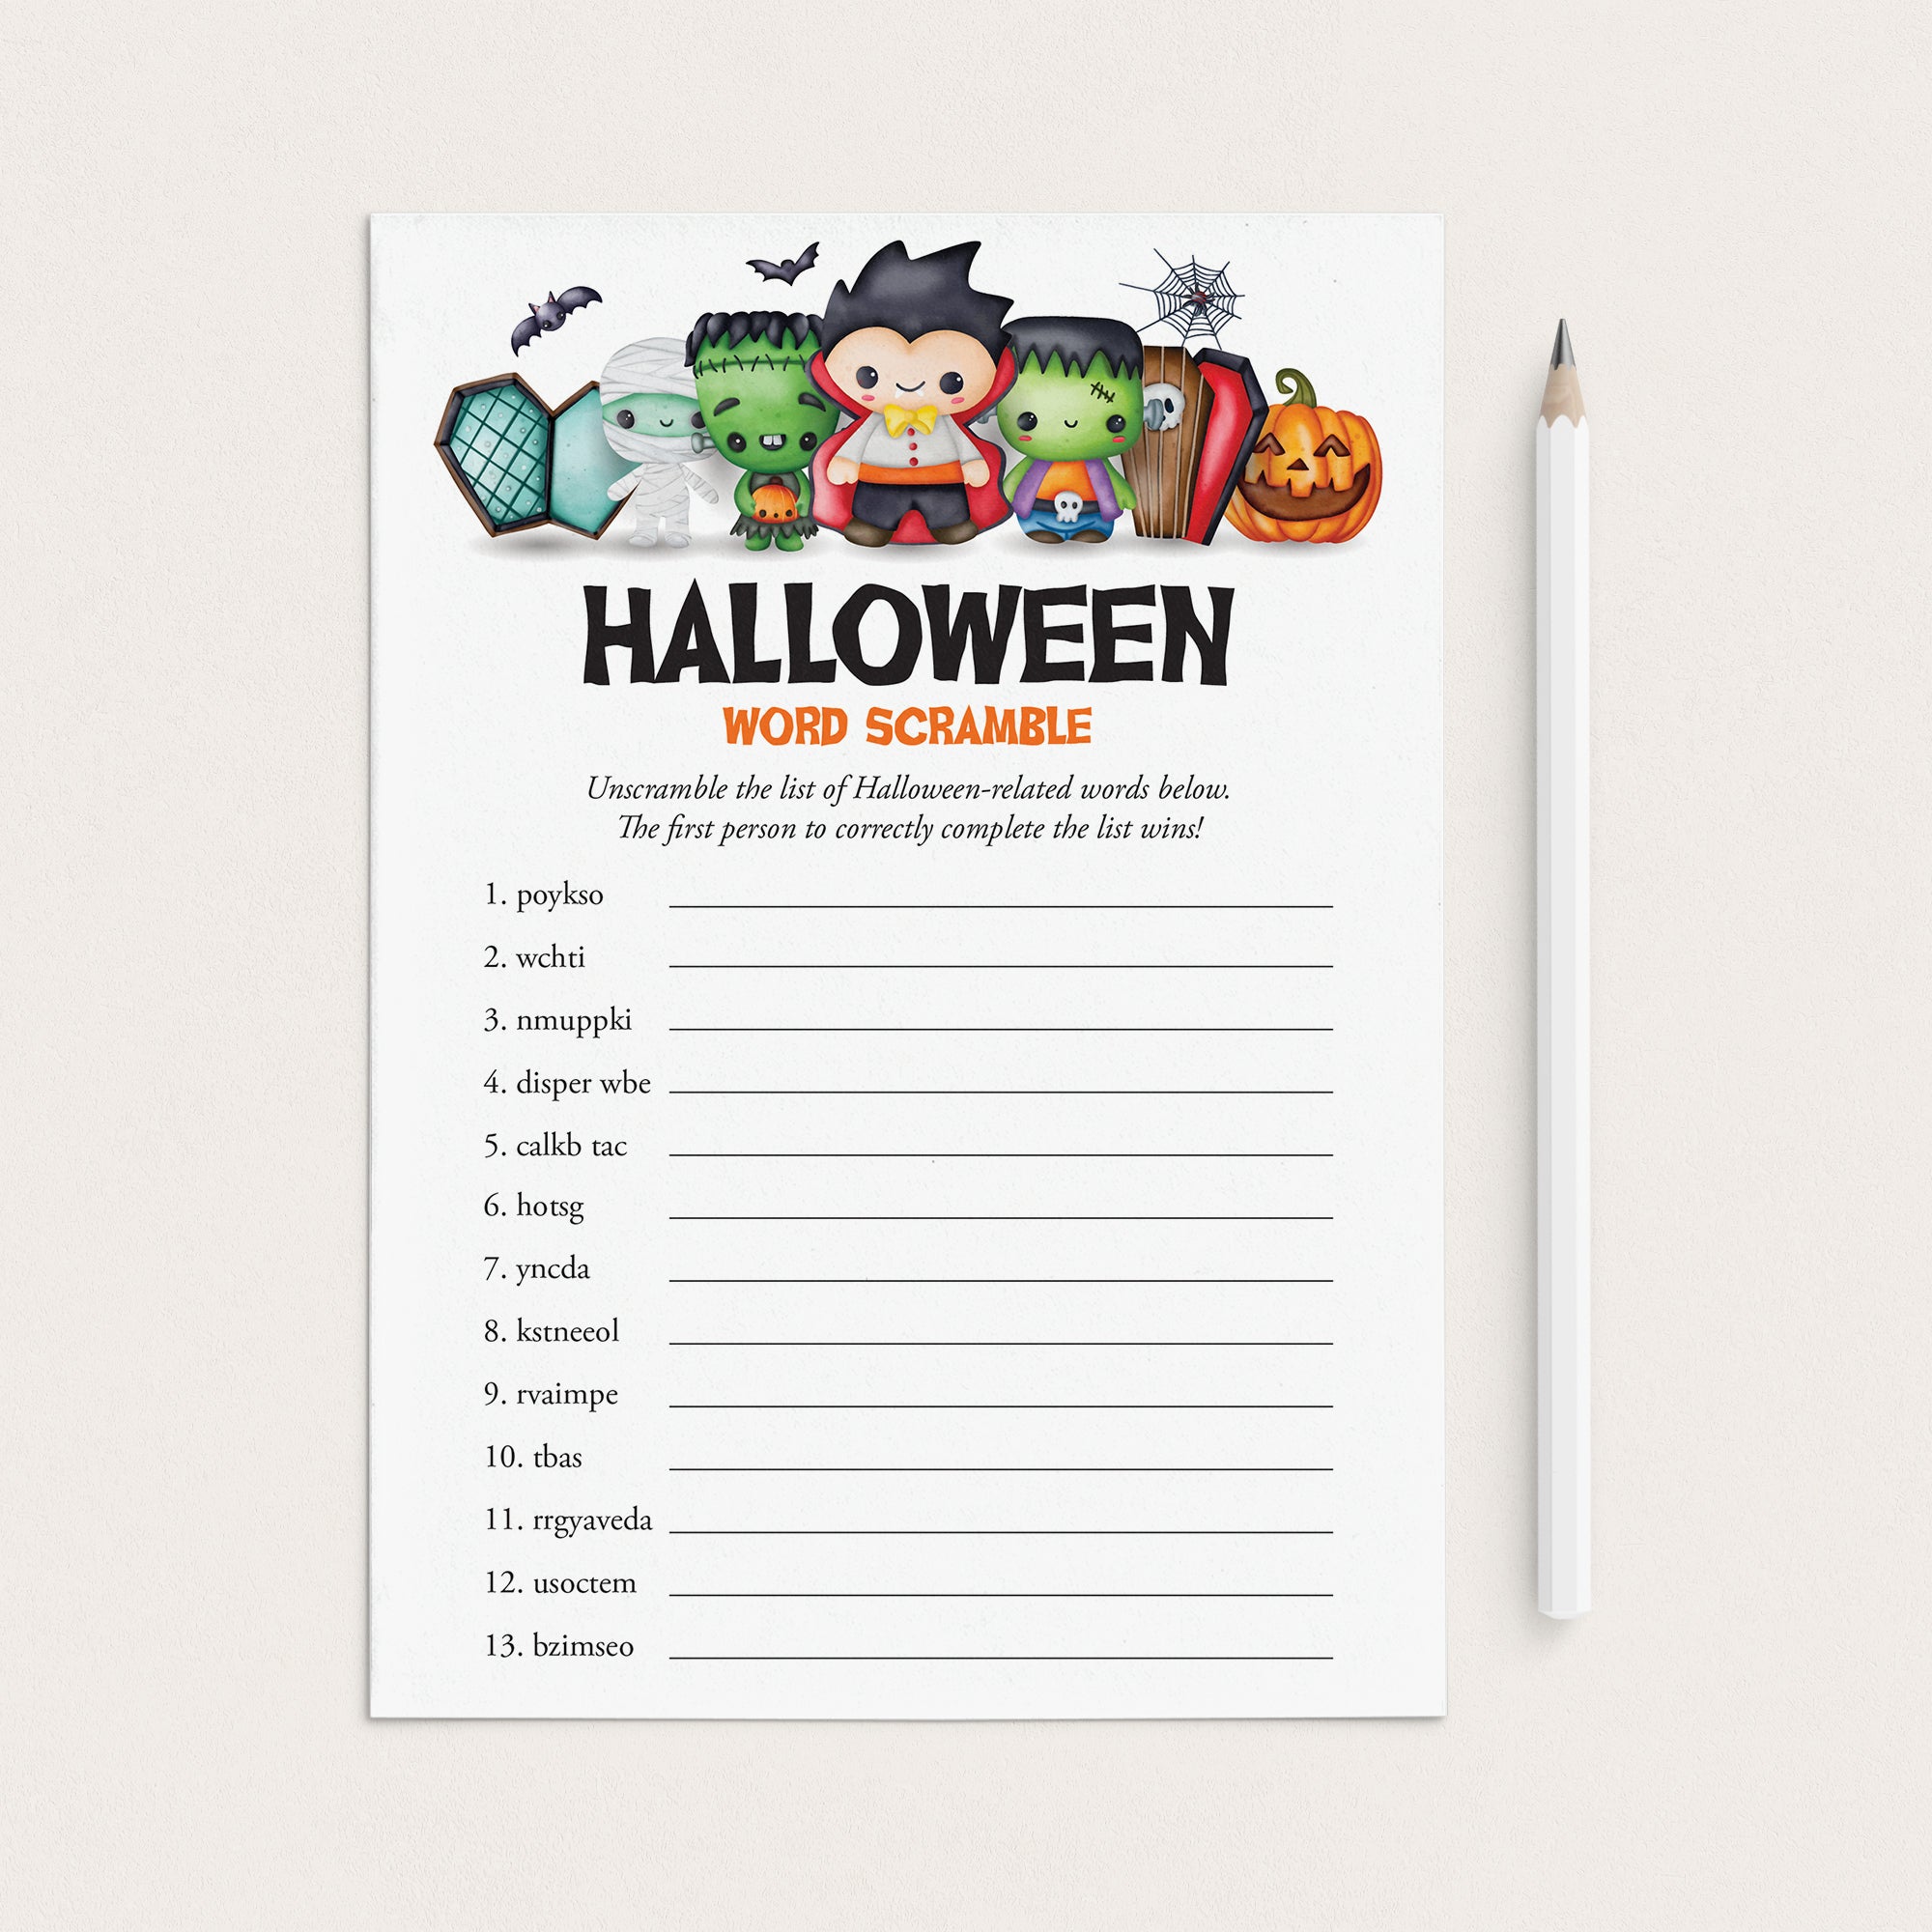 Halloween Word Scramble Game with Answer Key Printable by LittleSizzle